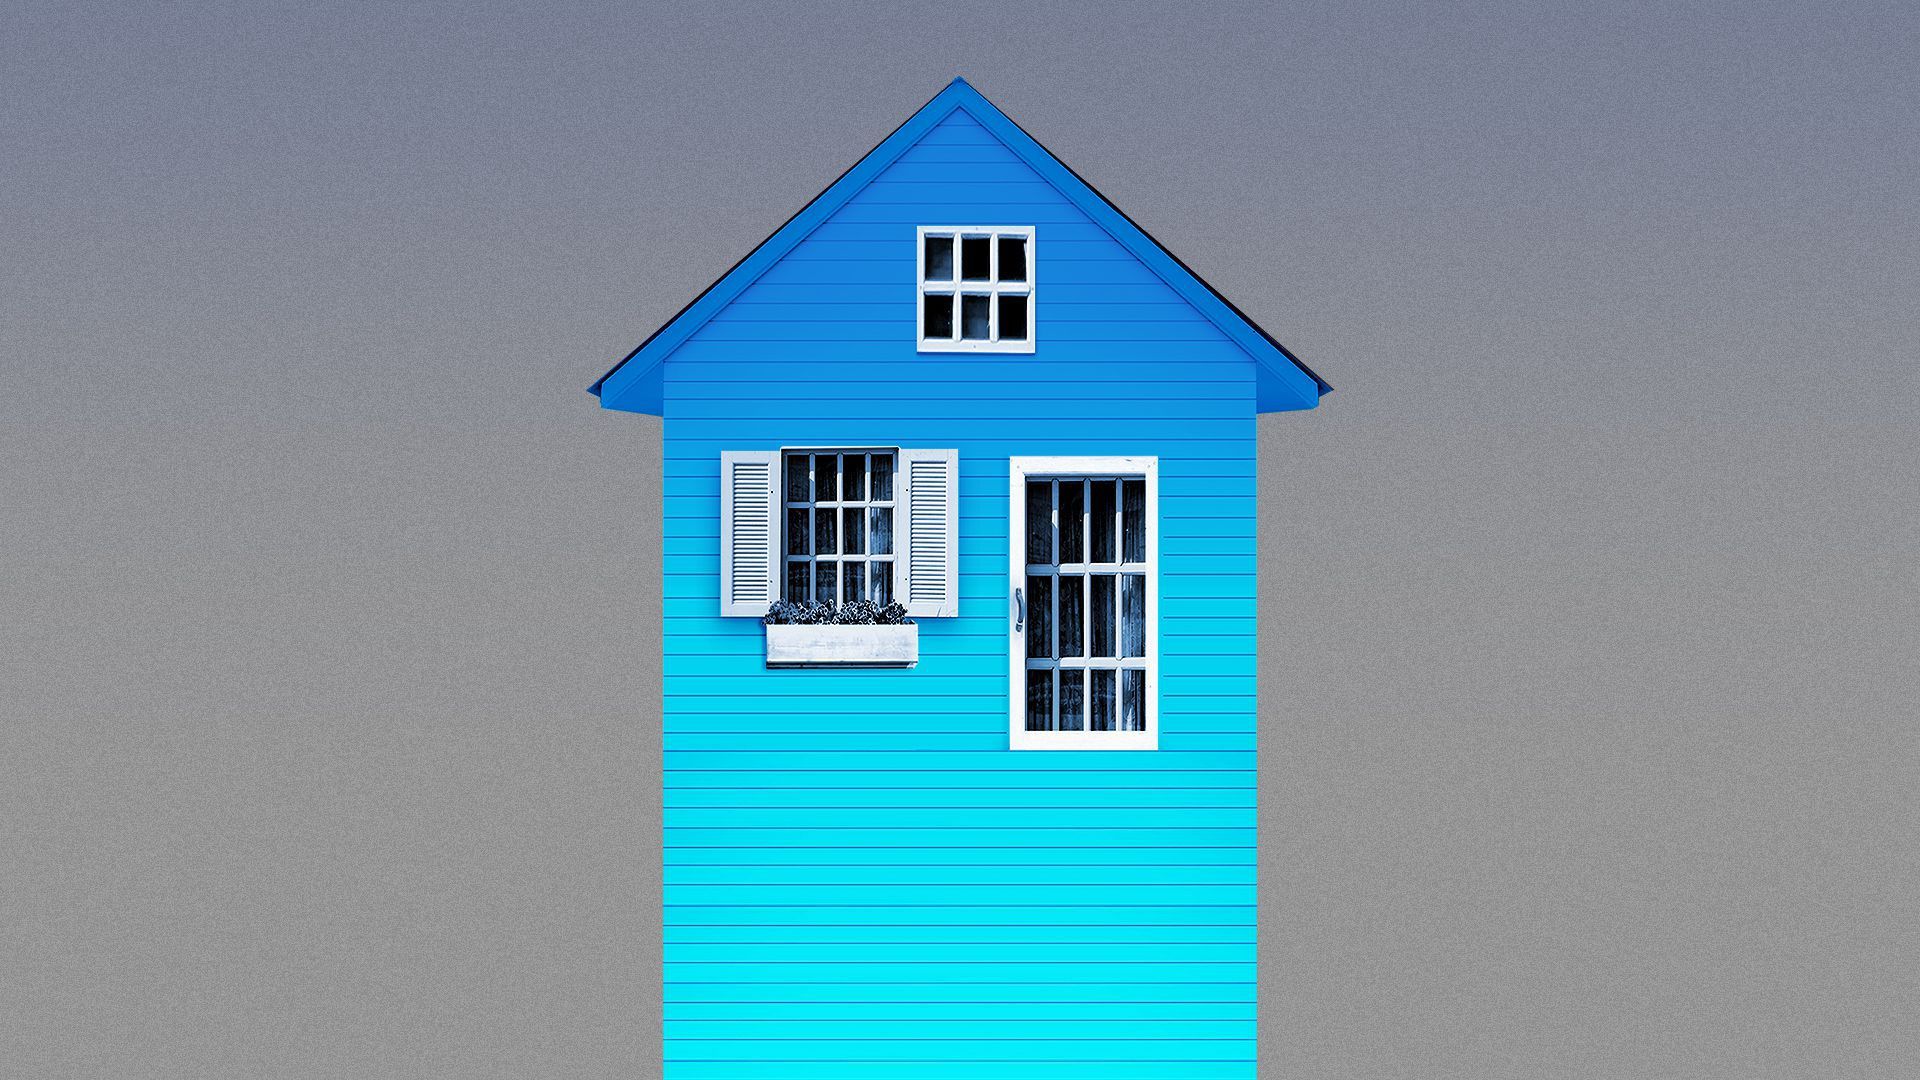 Illustration of a house.